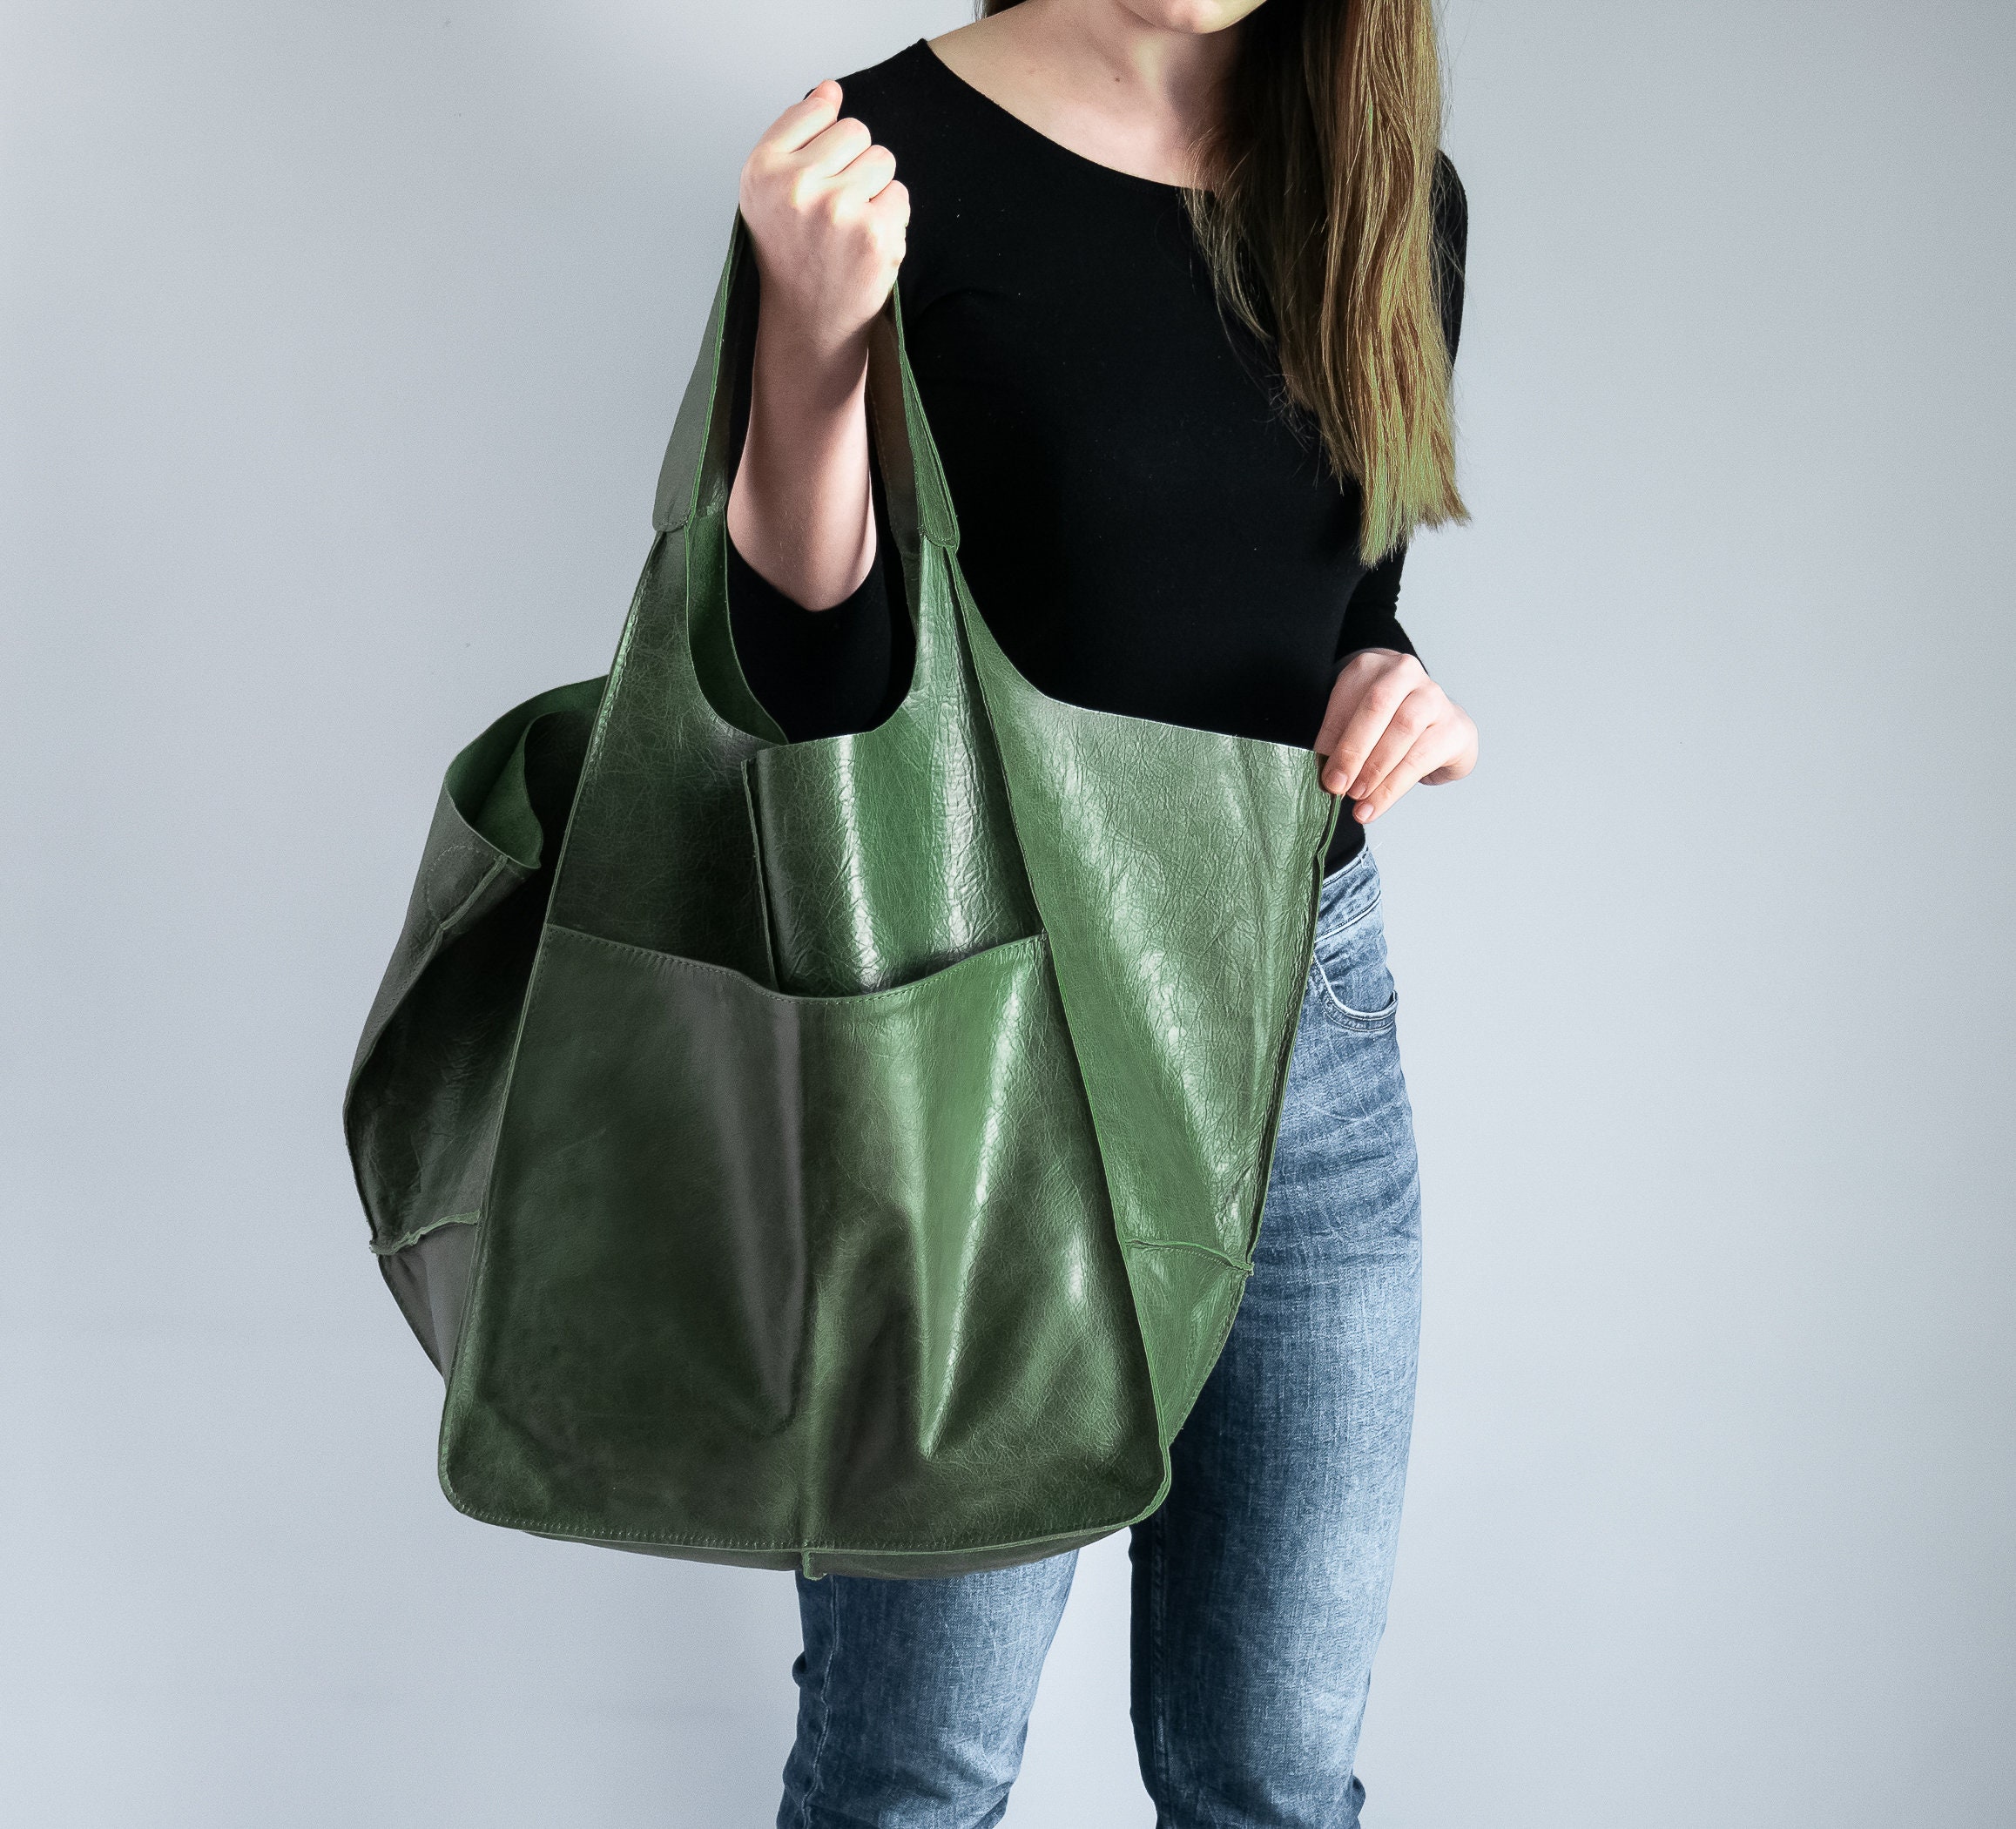 Manila All Purpose Carryall Tote Bag In Forest Green